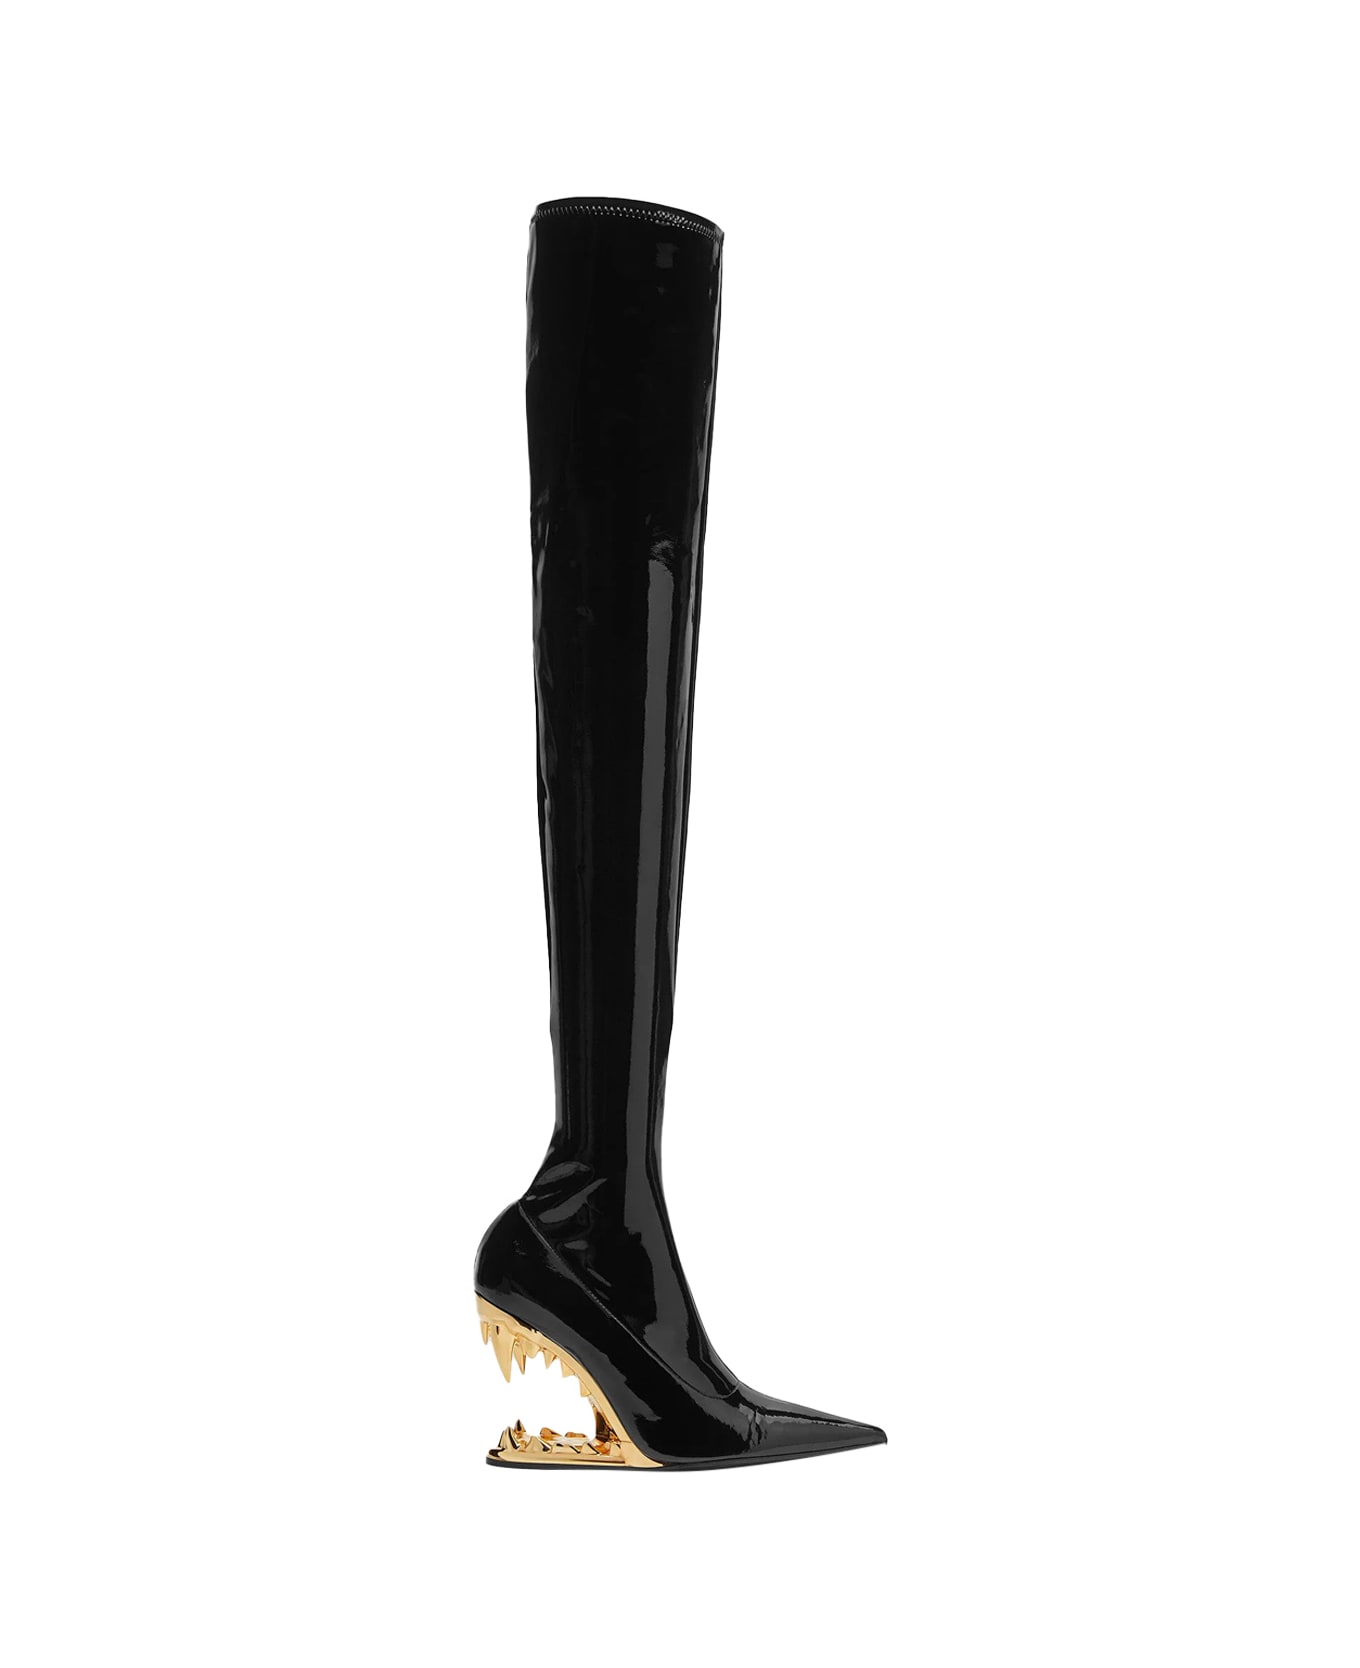 GCDS 110 Mm Morso Boots In Black - Gold